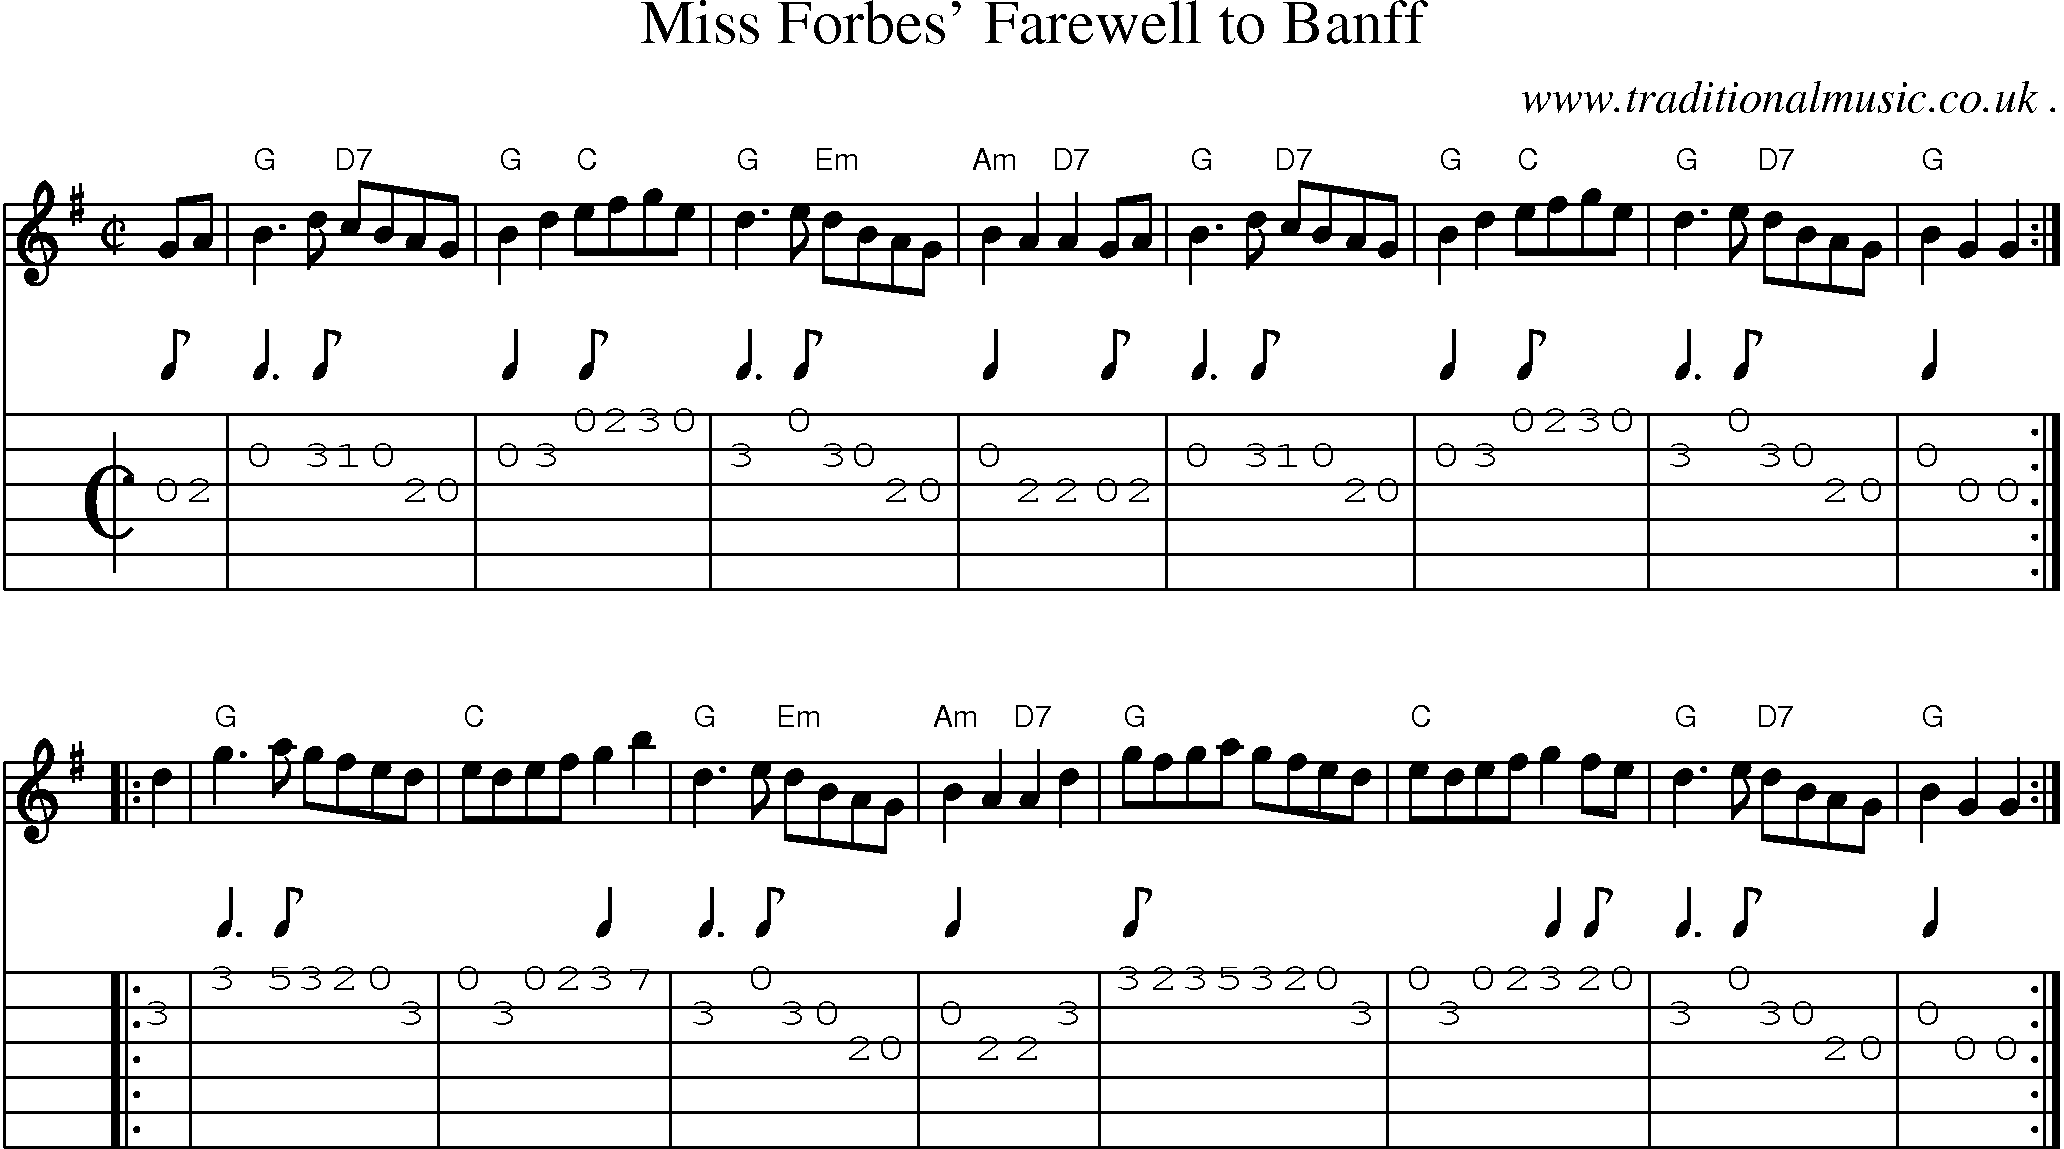 Sheet-music  score, Chords and Guitar Tabs for Miss Forbes Farewell To Banff